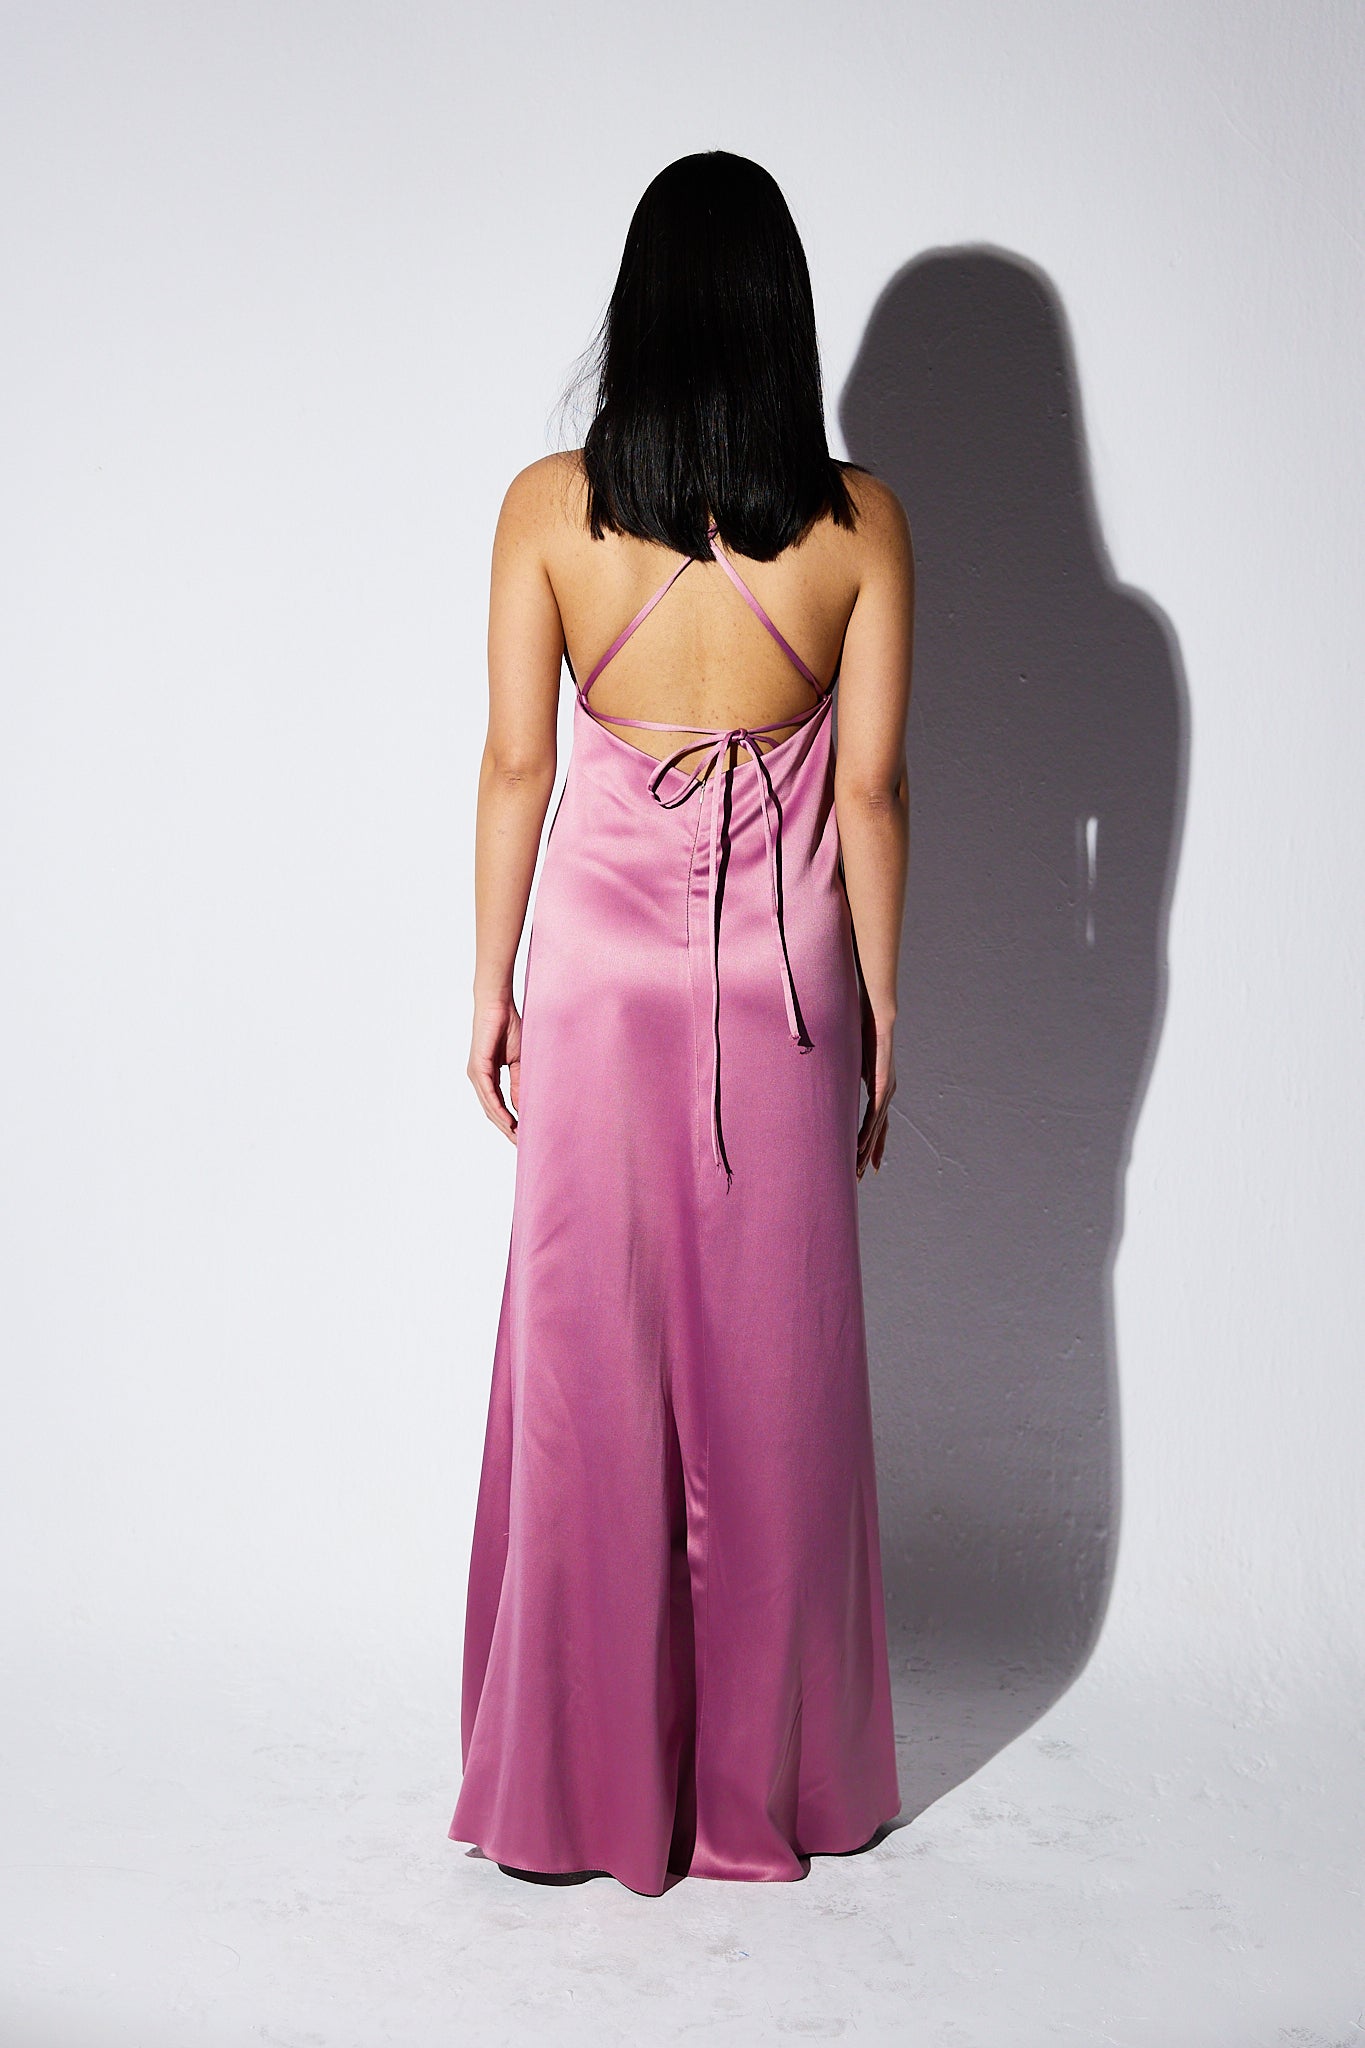 The Backless Satin in Purple